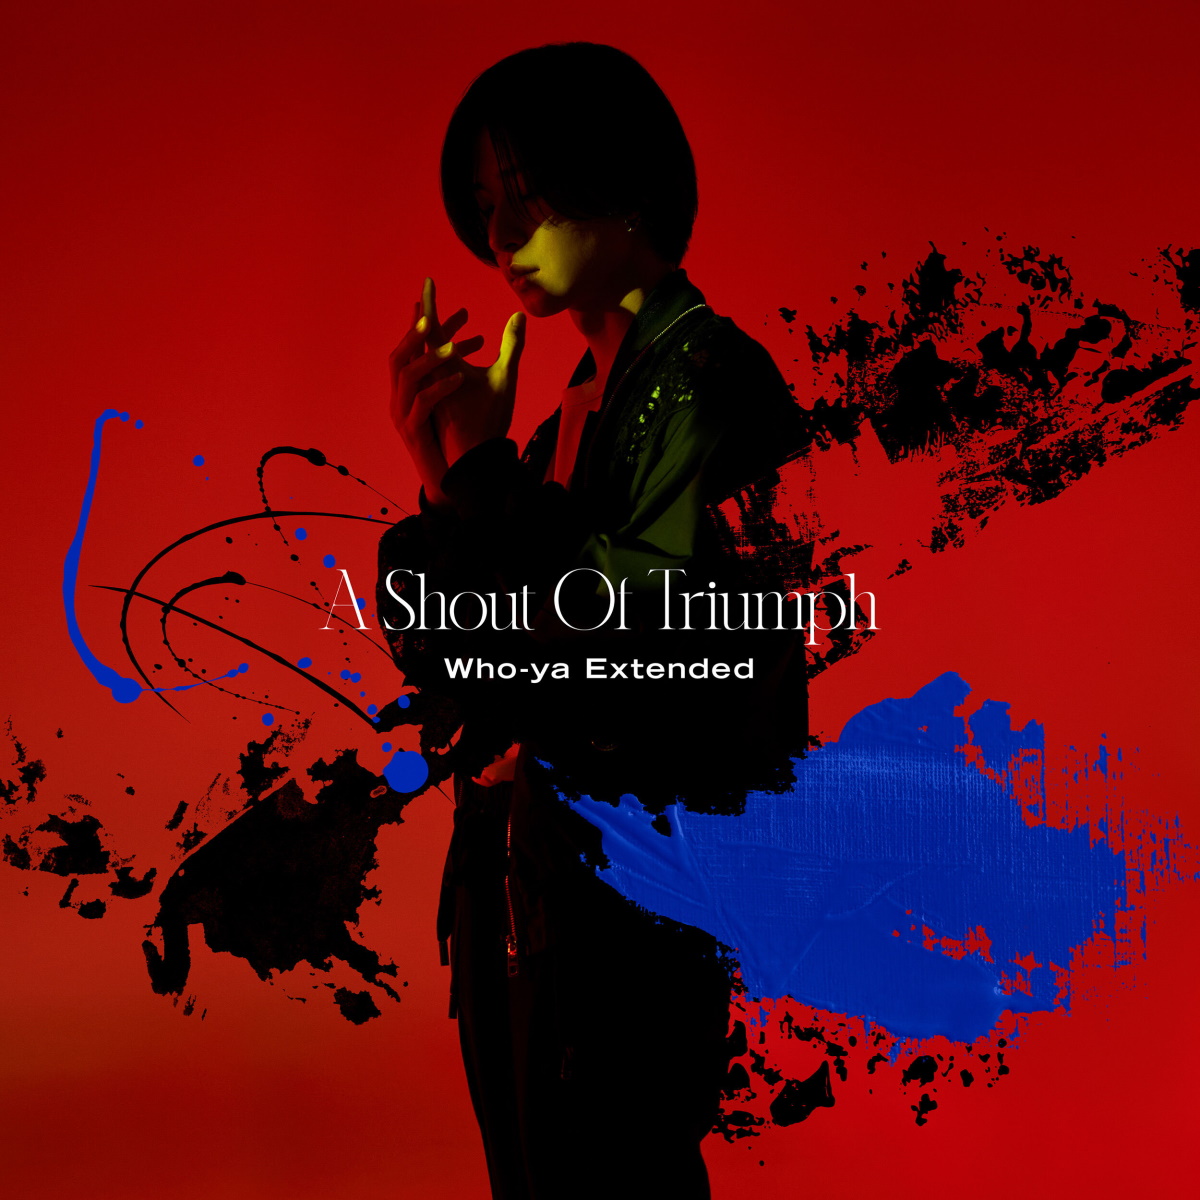 Cover art for『Who-ya Extended - half moon』from the release『A Shout Of Triumph